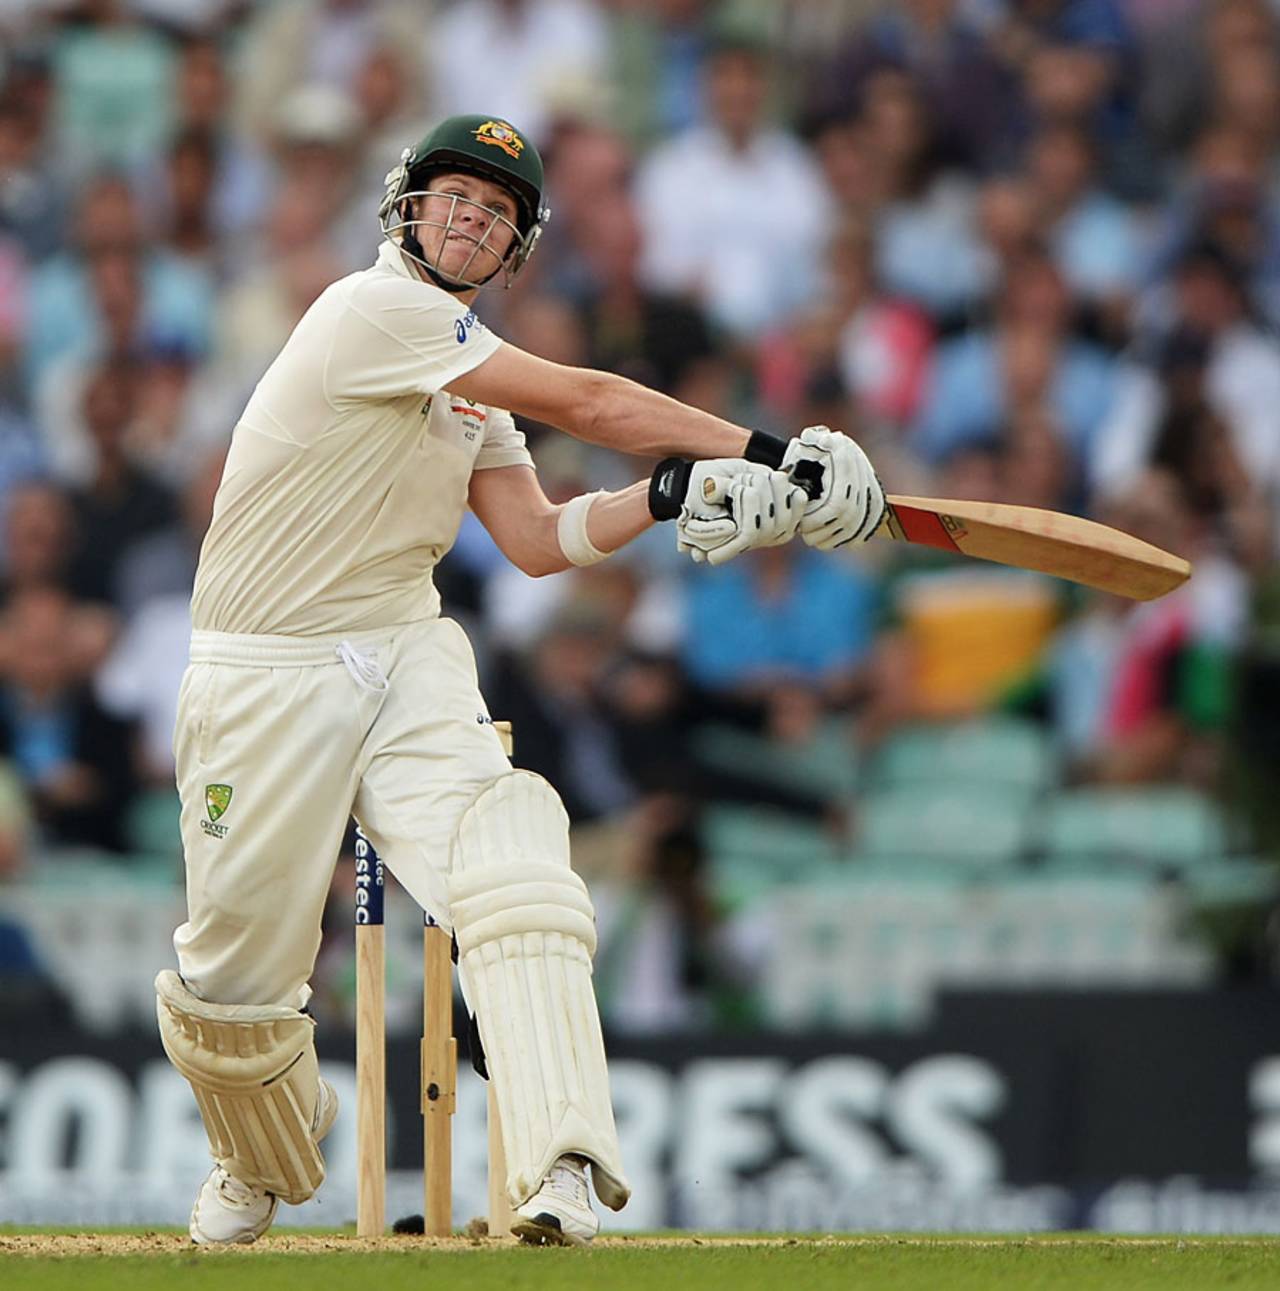 Steven Smith brought out the overhead smash, England v Australia, 5th Investec Test, The Oval, 2nd day, August 22, 2013